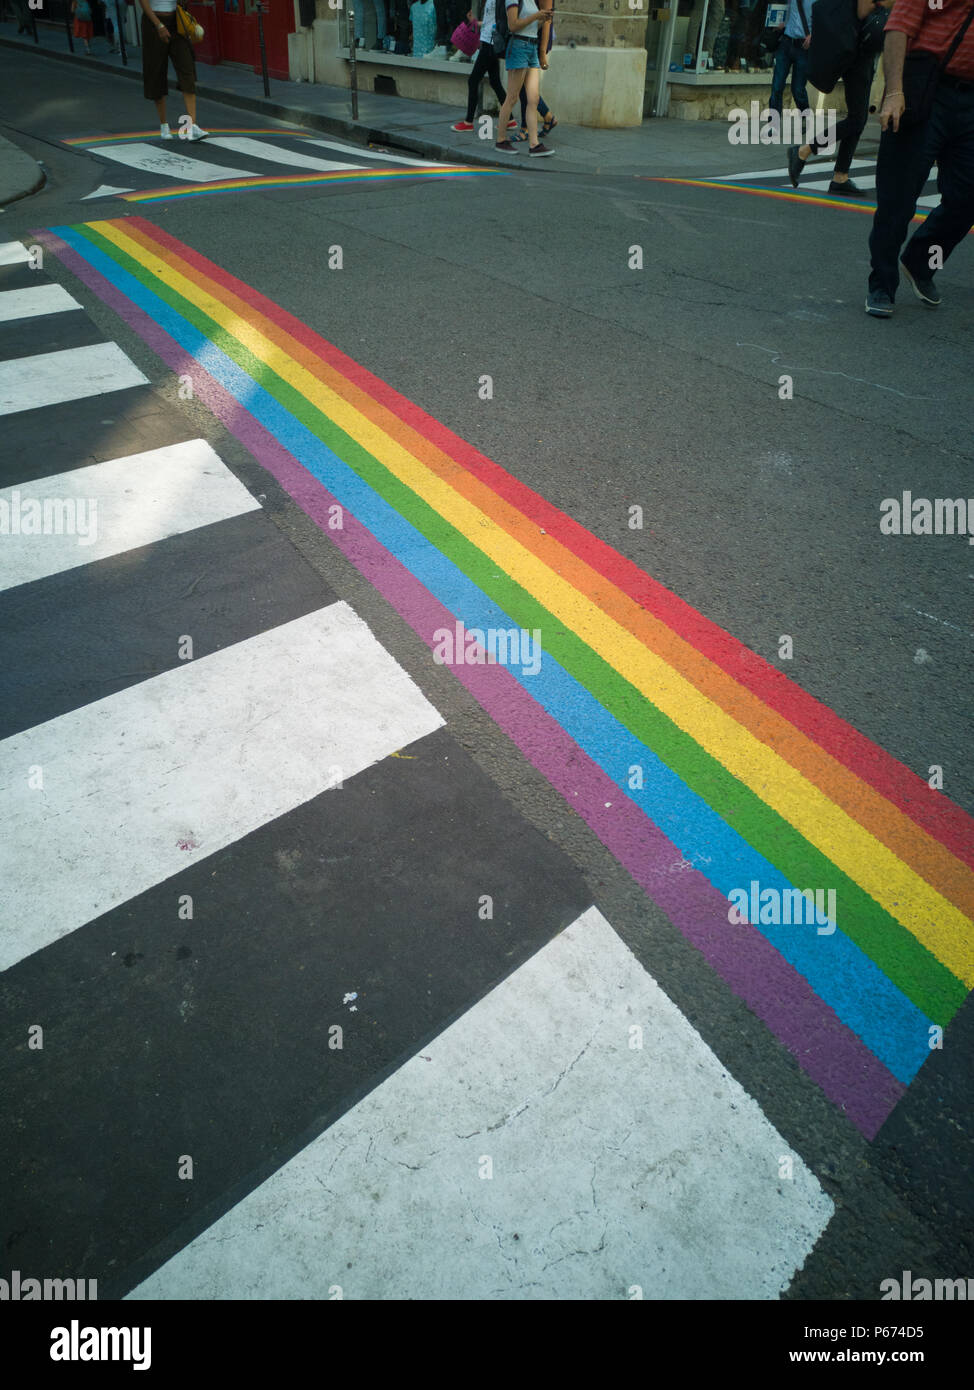 To prepare the gay pride in Paris pedestrian crosswalks were painted in the colors of the rainbow. Stock Photo